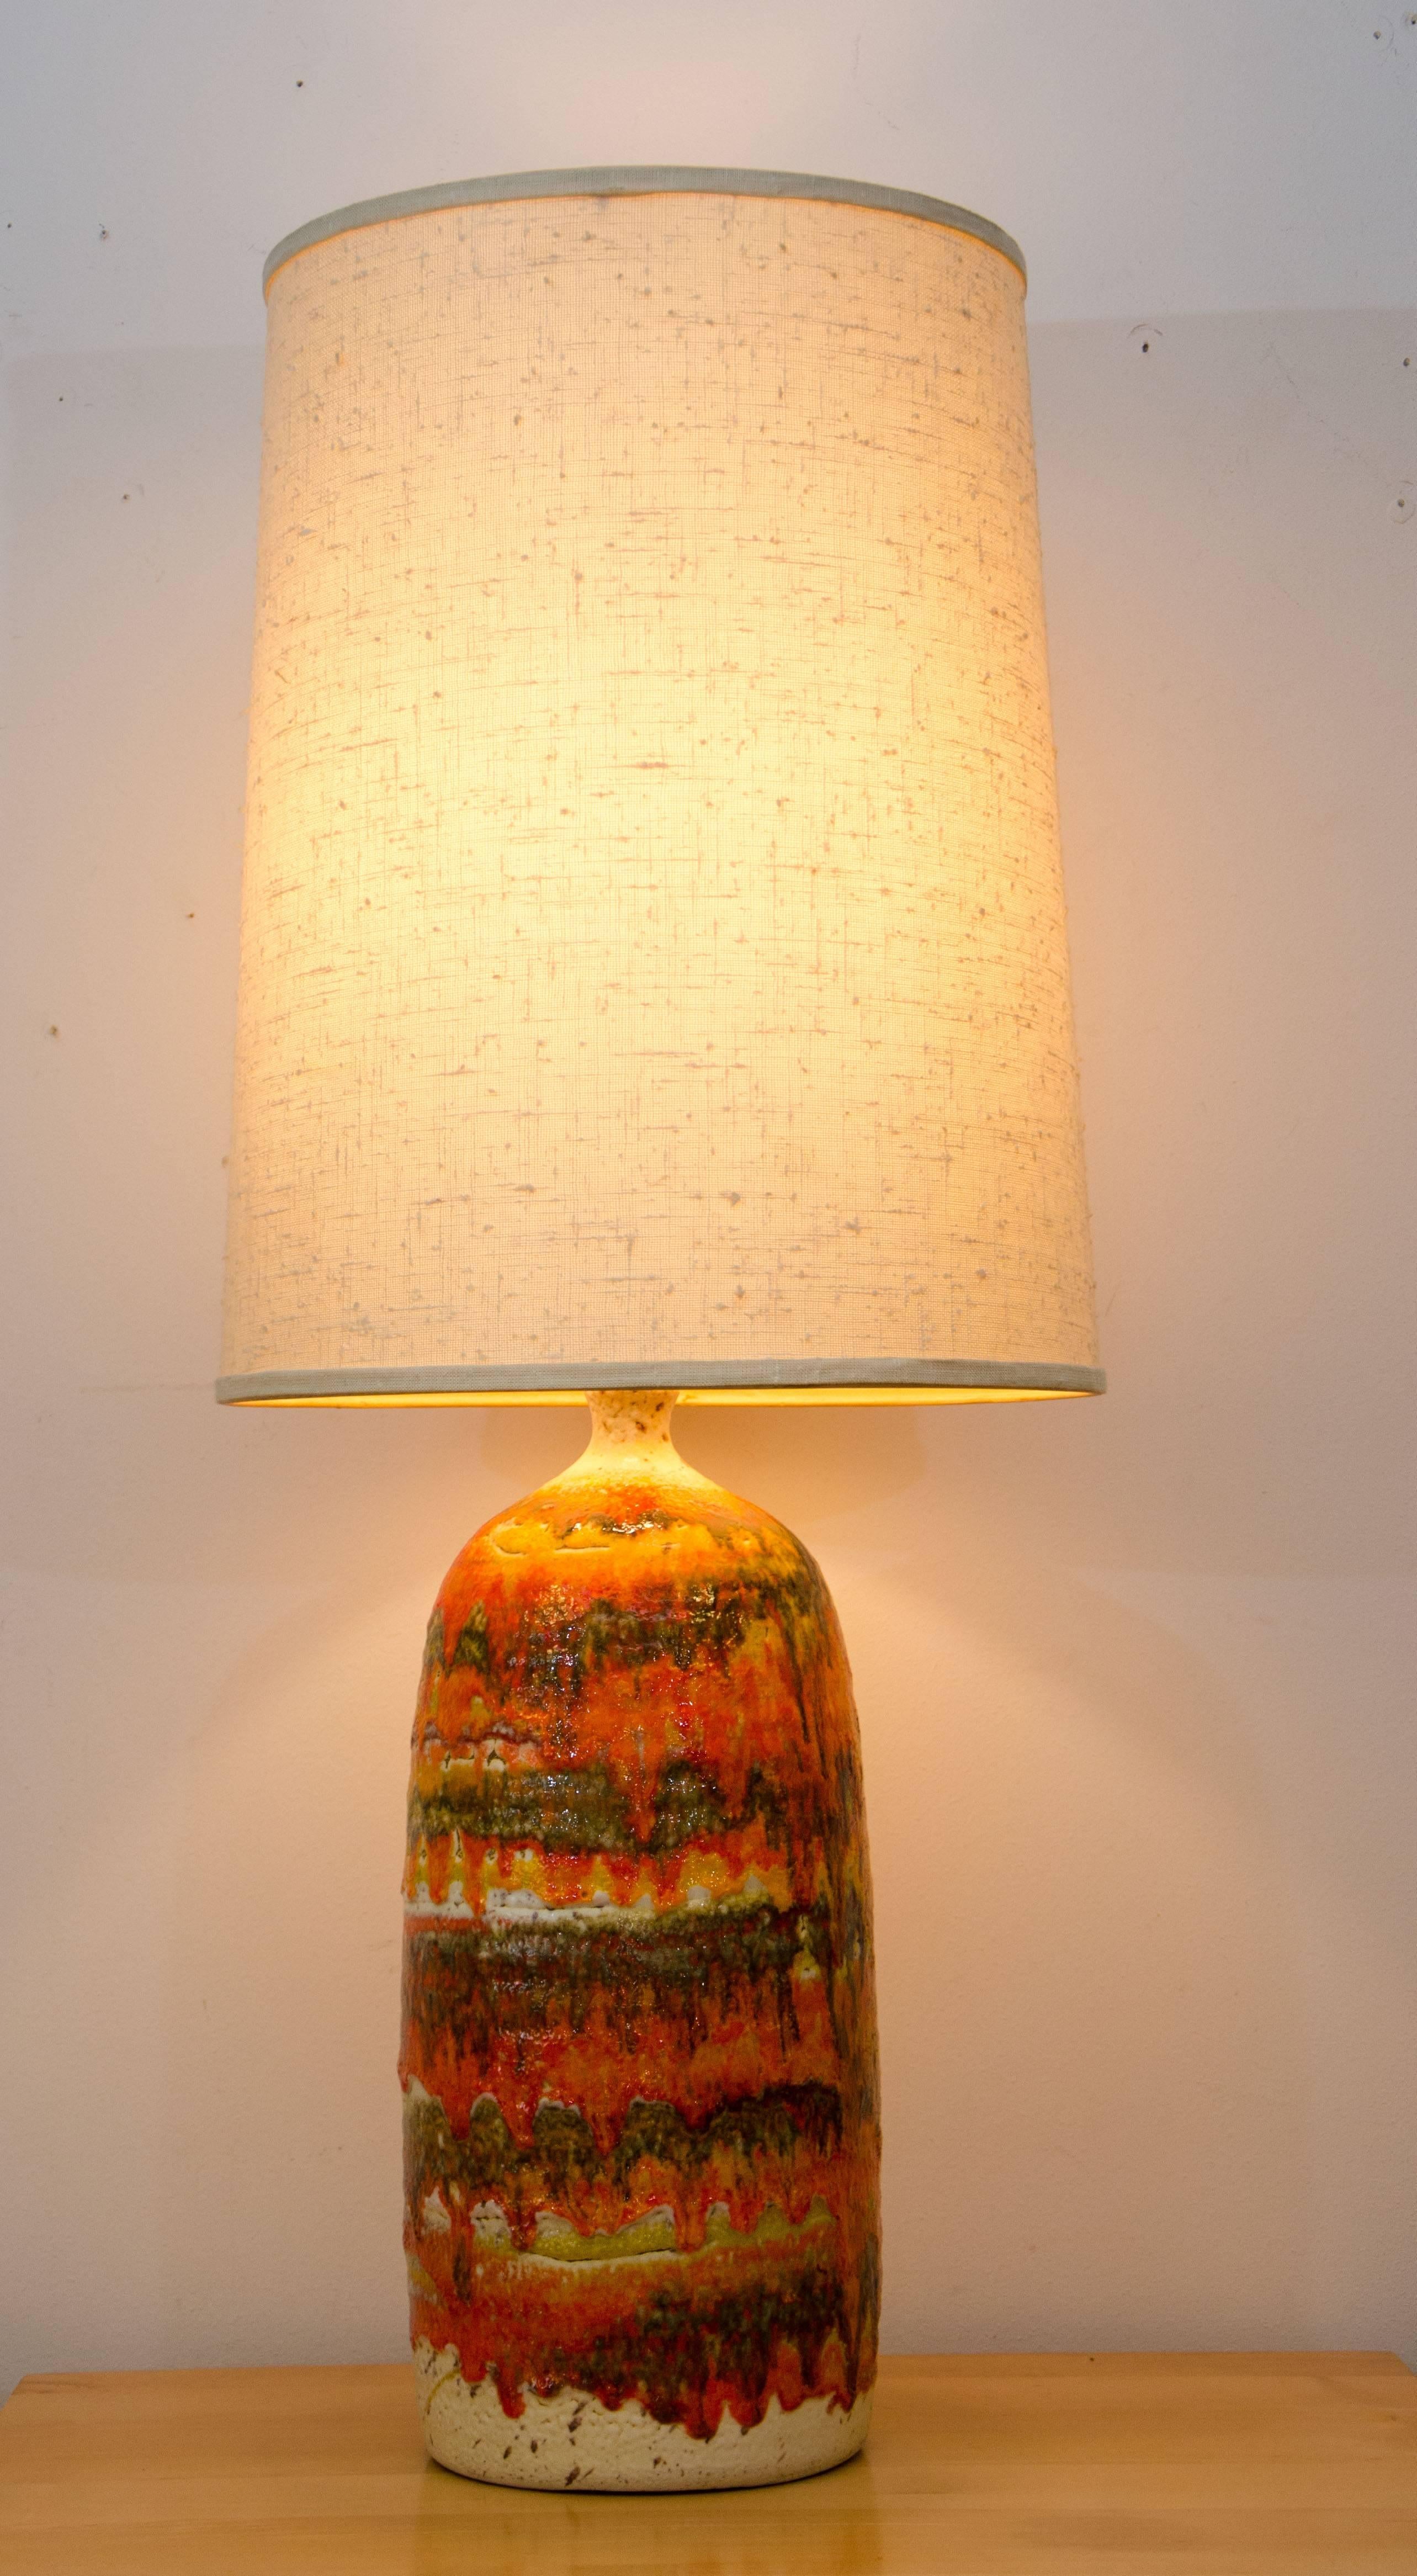 Beautiful Studio Pottery table lamp exhibiting shades of off-white, orange, yellow, and green with a textured drip glaze effect. The original shade is the perfect size and is also textured.
The shade is 18 1 / 4